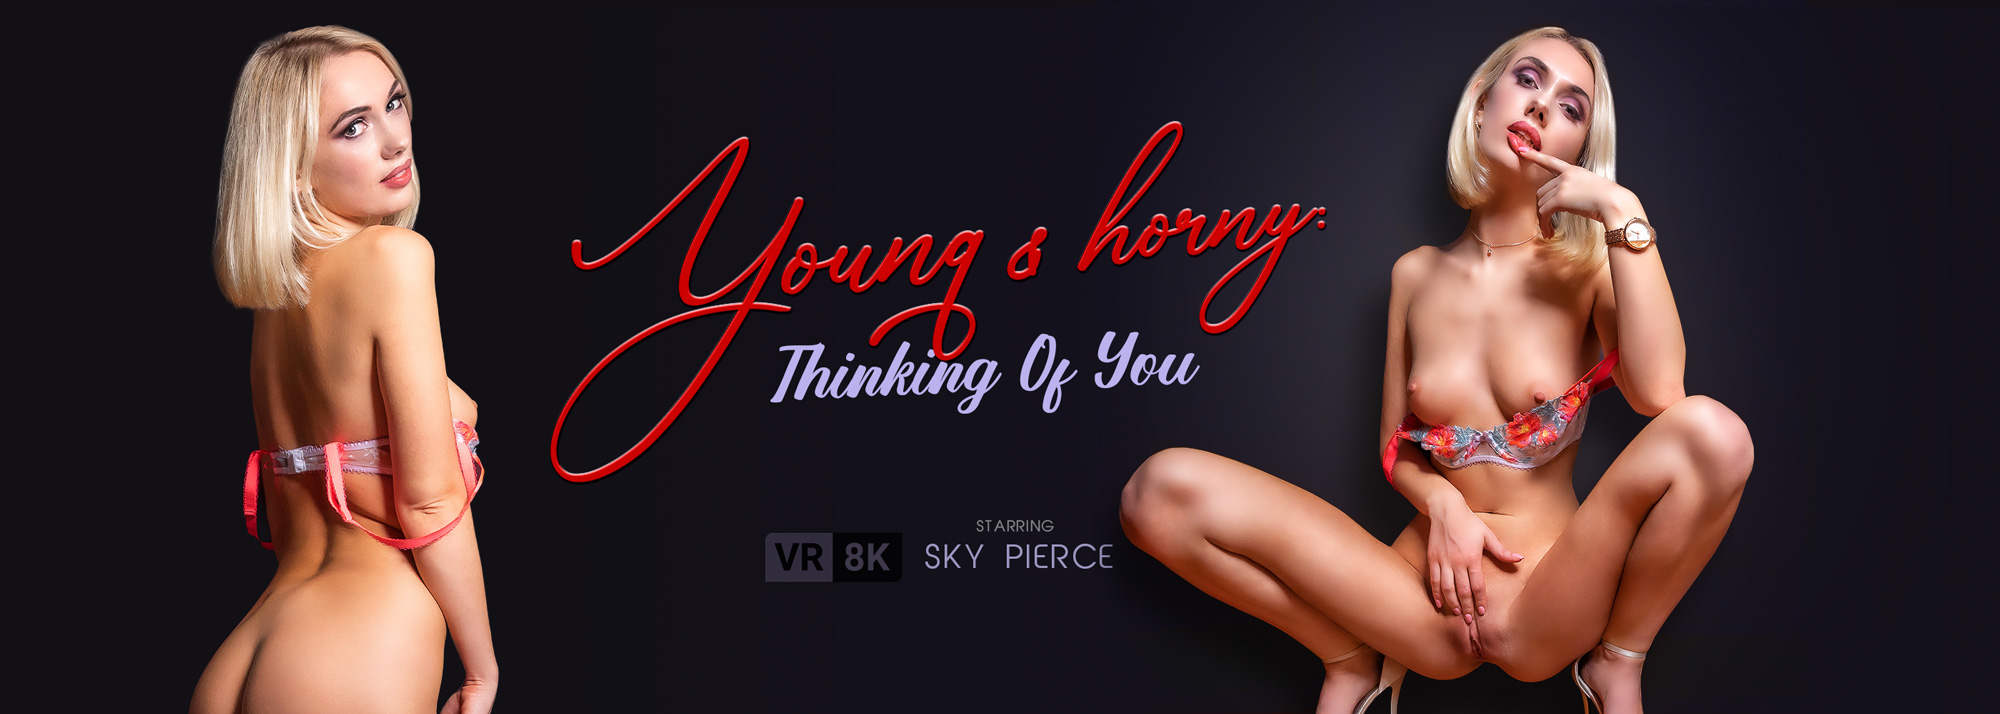 Young & Horny: Thinking Of You - VR Porn Video, Starring: Sky Pierce